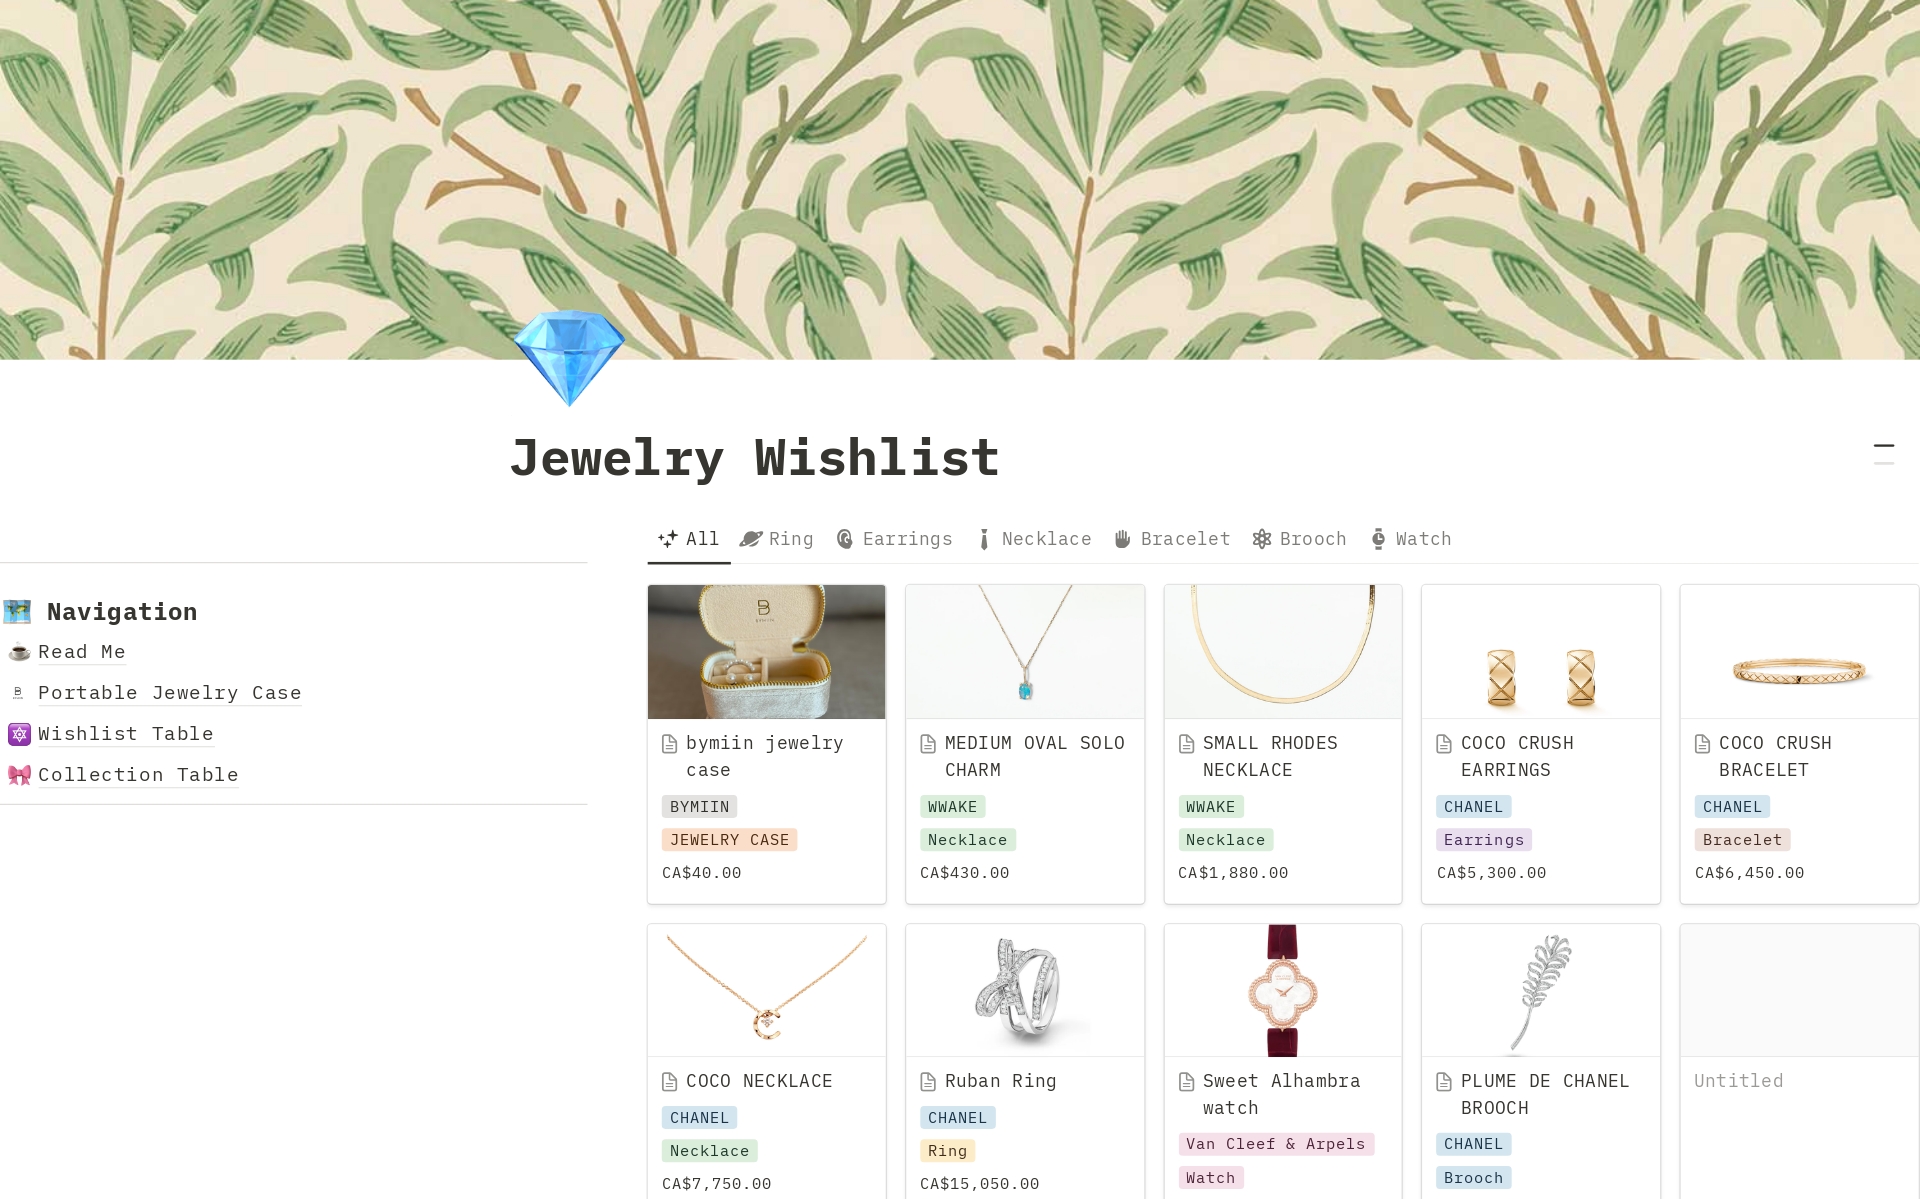 This template is ideal for jewelry enthusiasts looking to digitally catalog their collections and curate wish lists. It combines simplicity with thoughtful design for effortless organization.